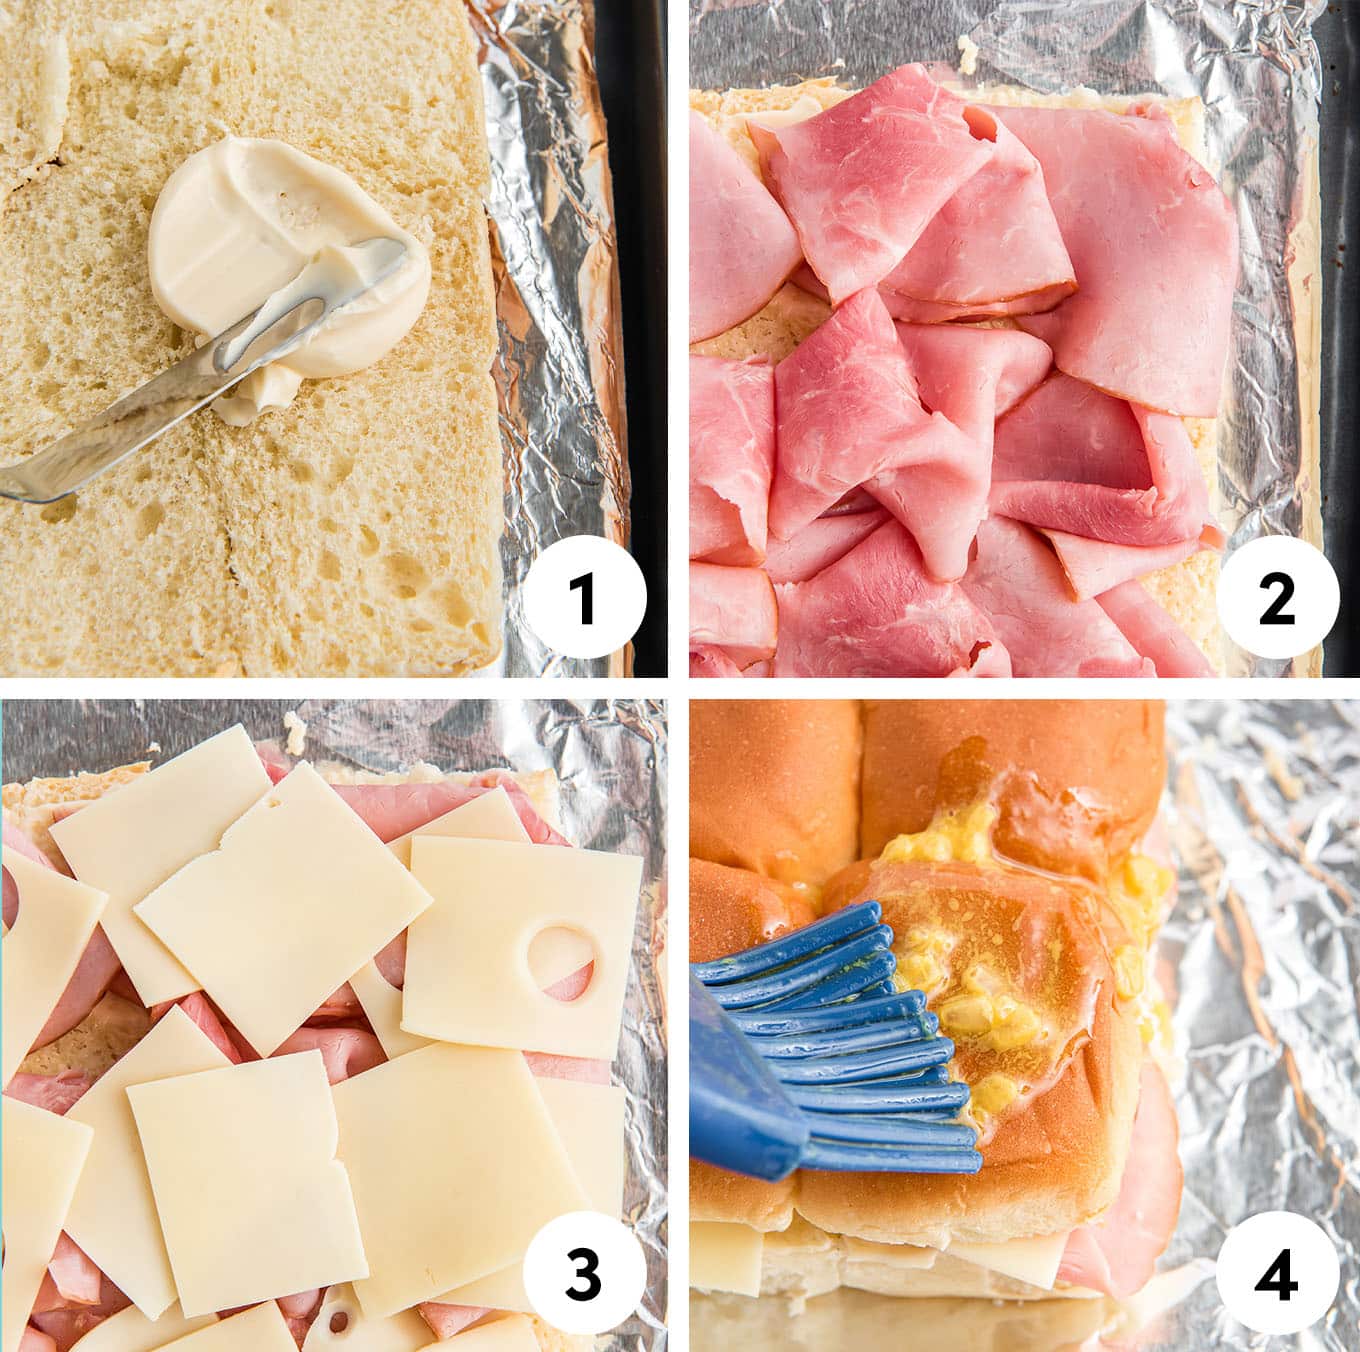 Hawaiian Rolls Sliders with ham and Swiss cheese step by step instructions./ Delicious ham and cheese sliders on soft and sweet Hawaiian rolls, stacked with melted cheese, juicy ham, and topped with a golden-brown glaze, perfect for a quick dinner or appetizer. 